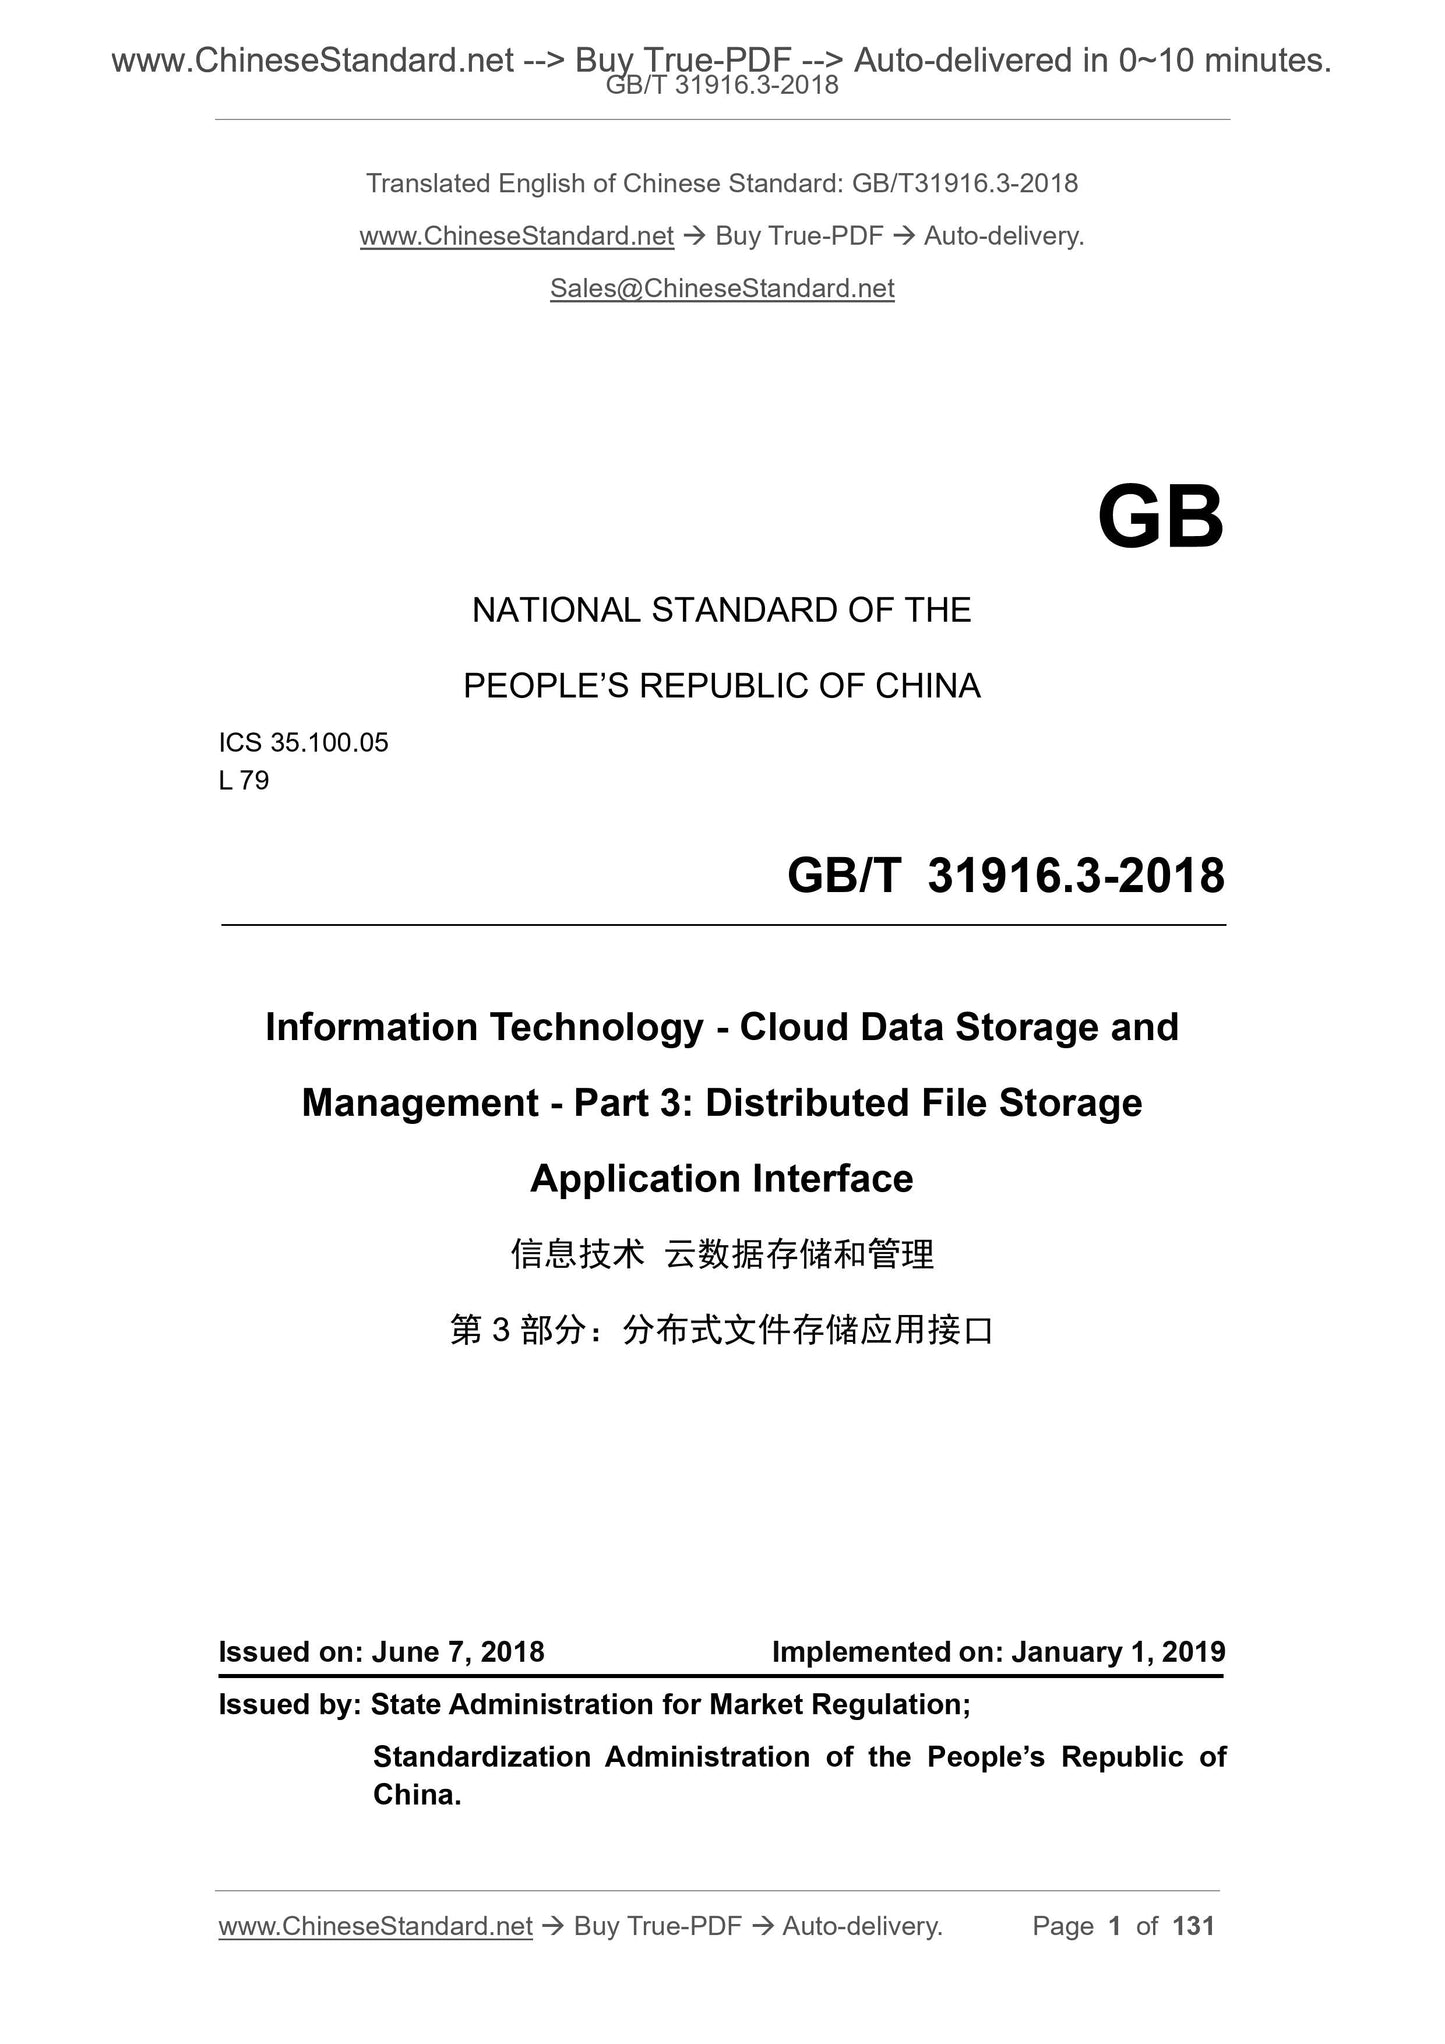 GB/T 31916.3-2018 Page 1